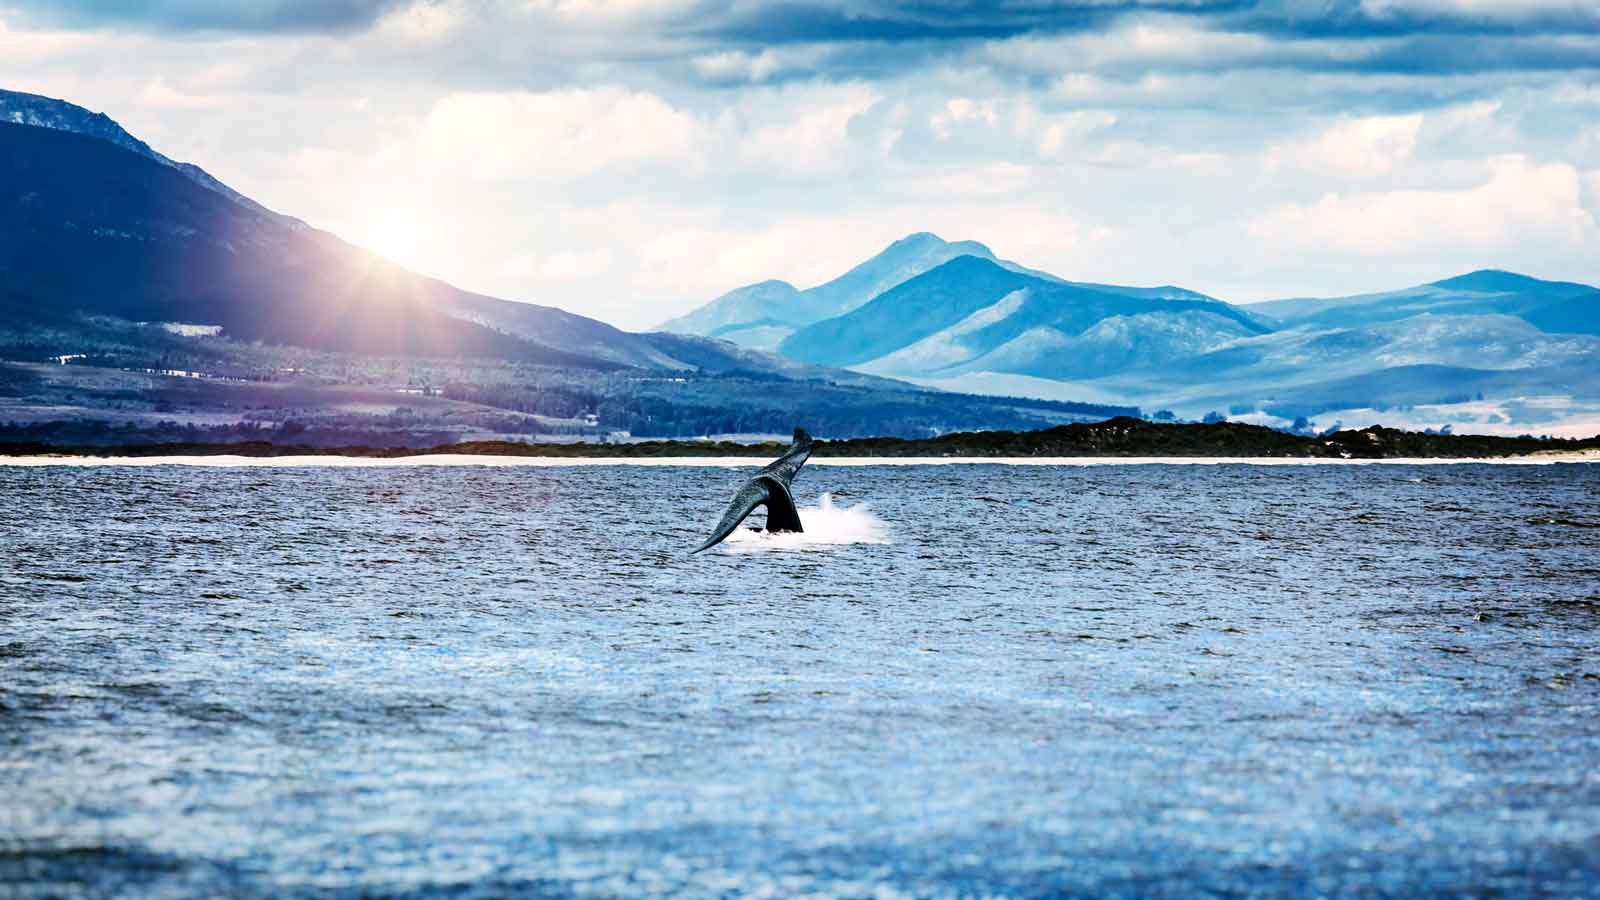 <p>Hermanus is a bustling coastal town with long coastal boardwalks where people often catch glimpses of the whales that swim past. Get up close and personal with these gentle giants on a whale-watching tour boat in Hermanus.</p>